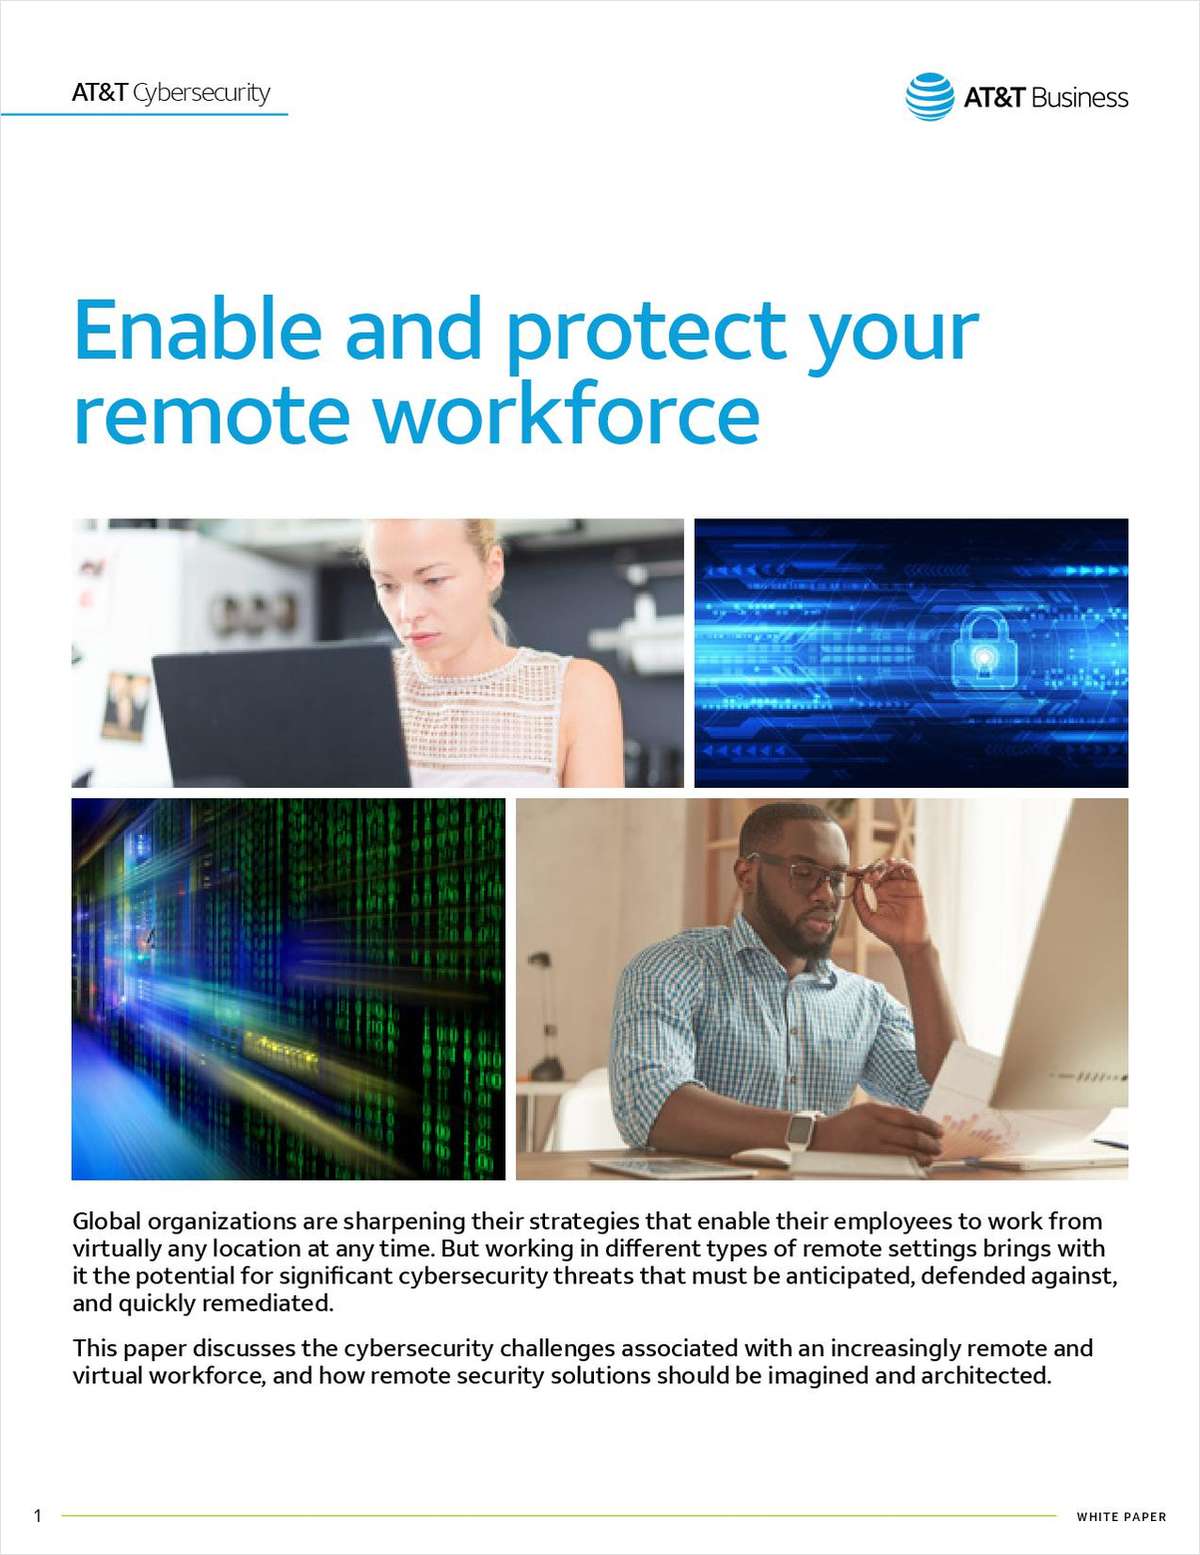 Enable and Protect Your Remote Workforce